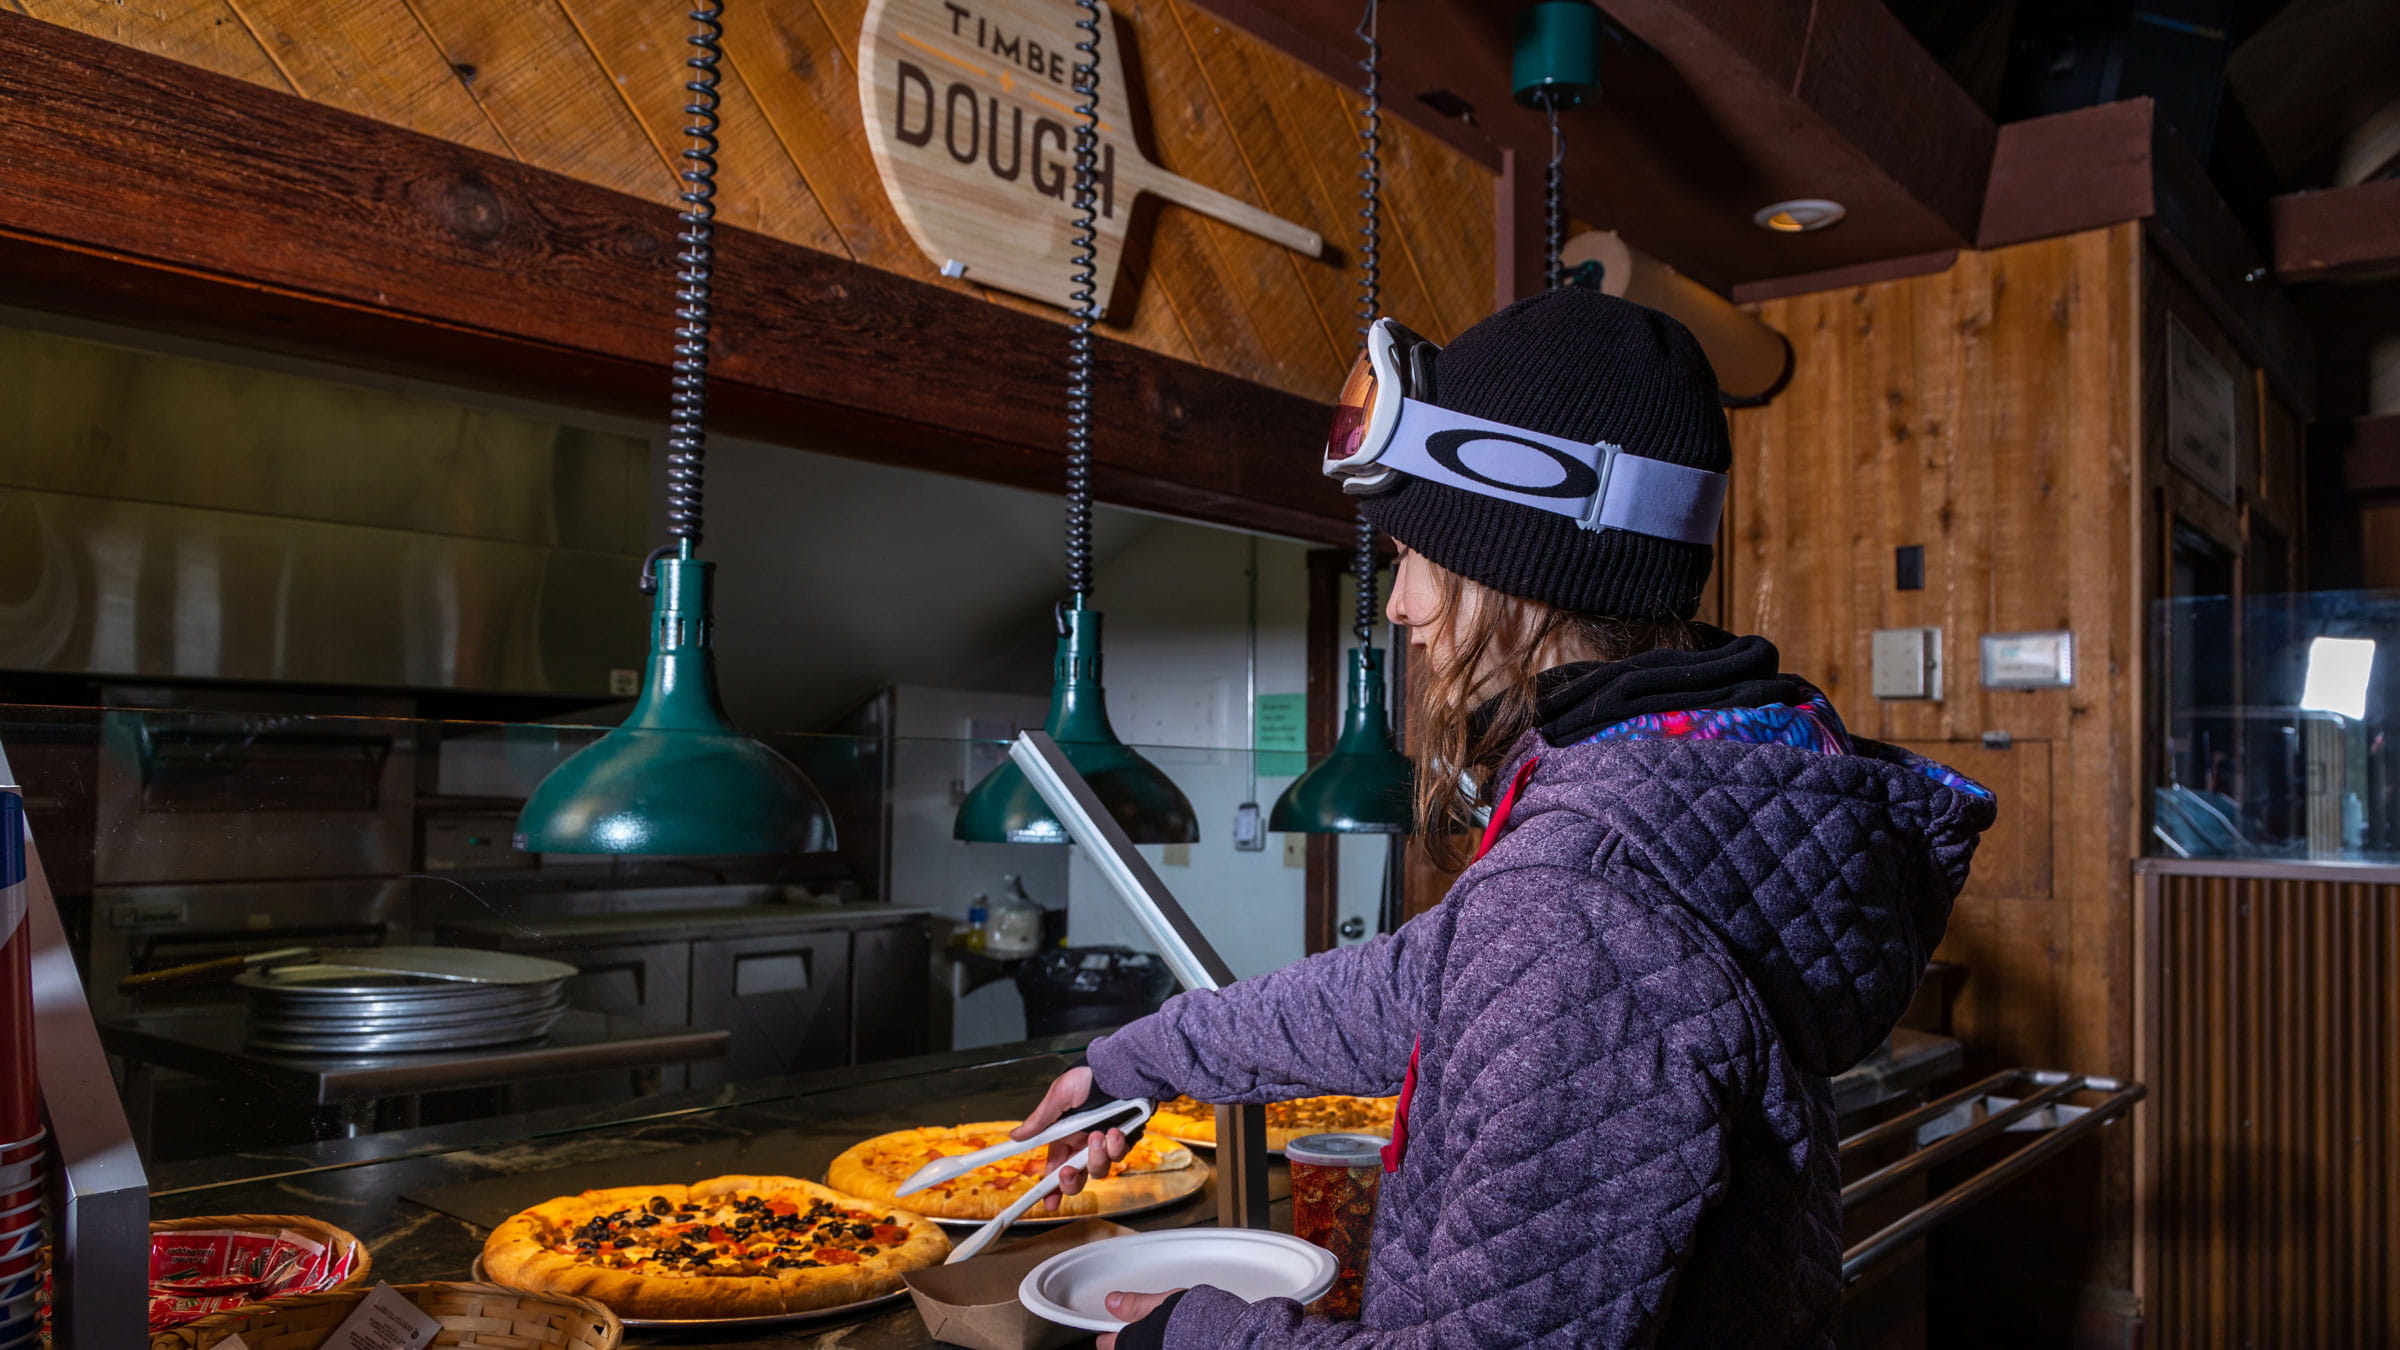 Young snowboarder grabbing a piece of pizza